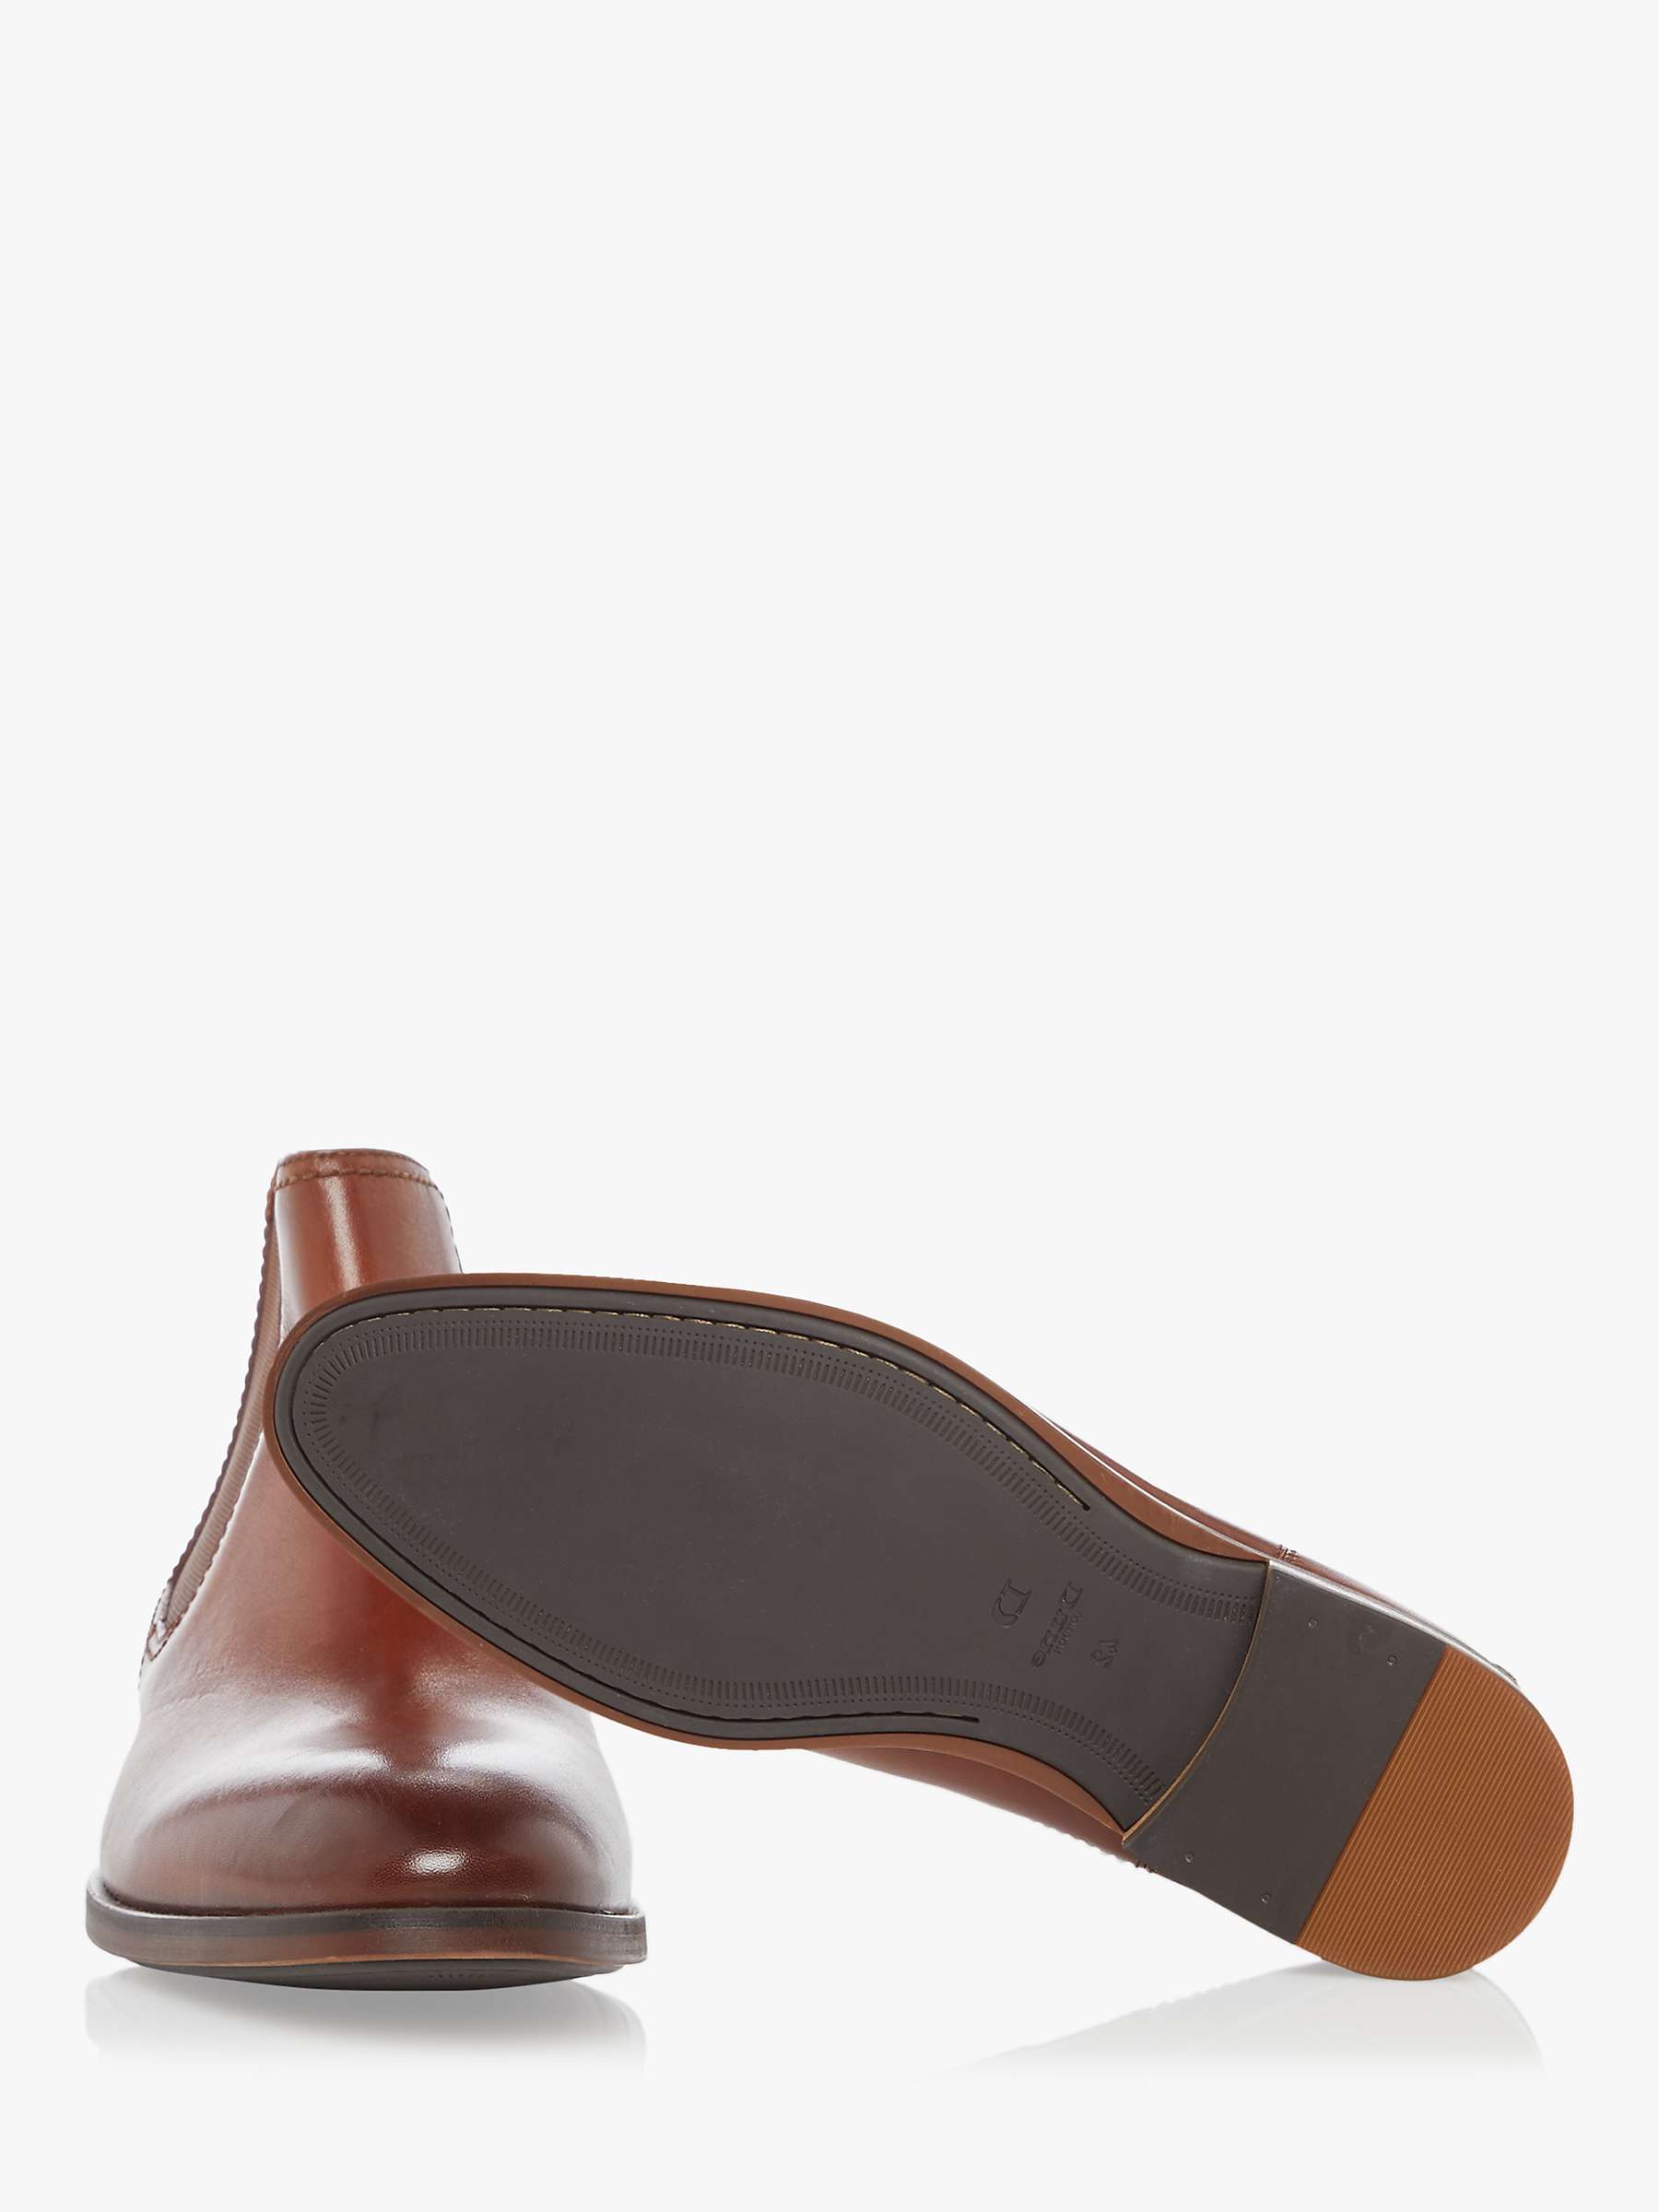 Dune Maker Leather Chelsea Boots, Tan at John Lewis & Partners